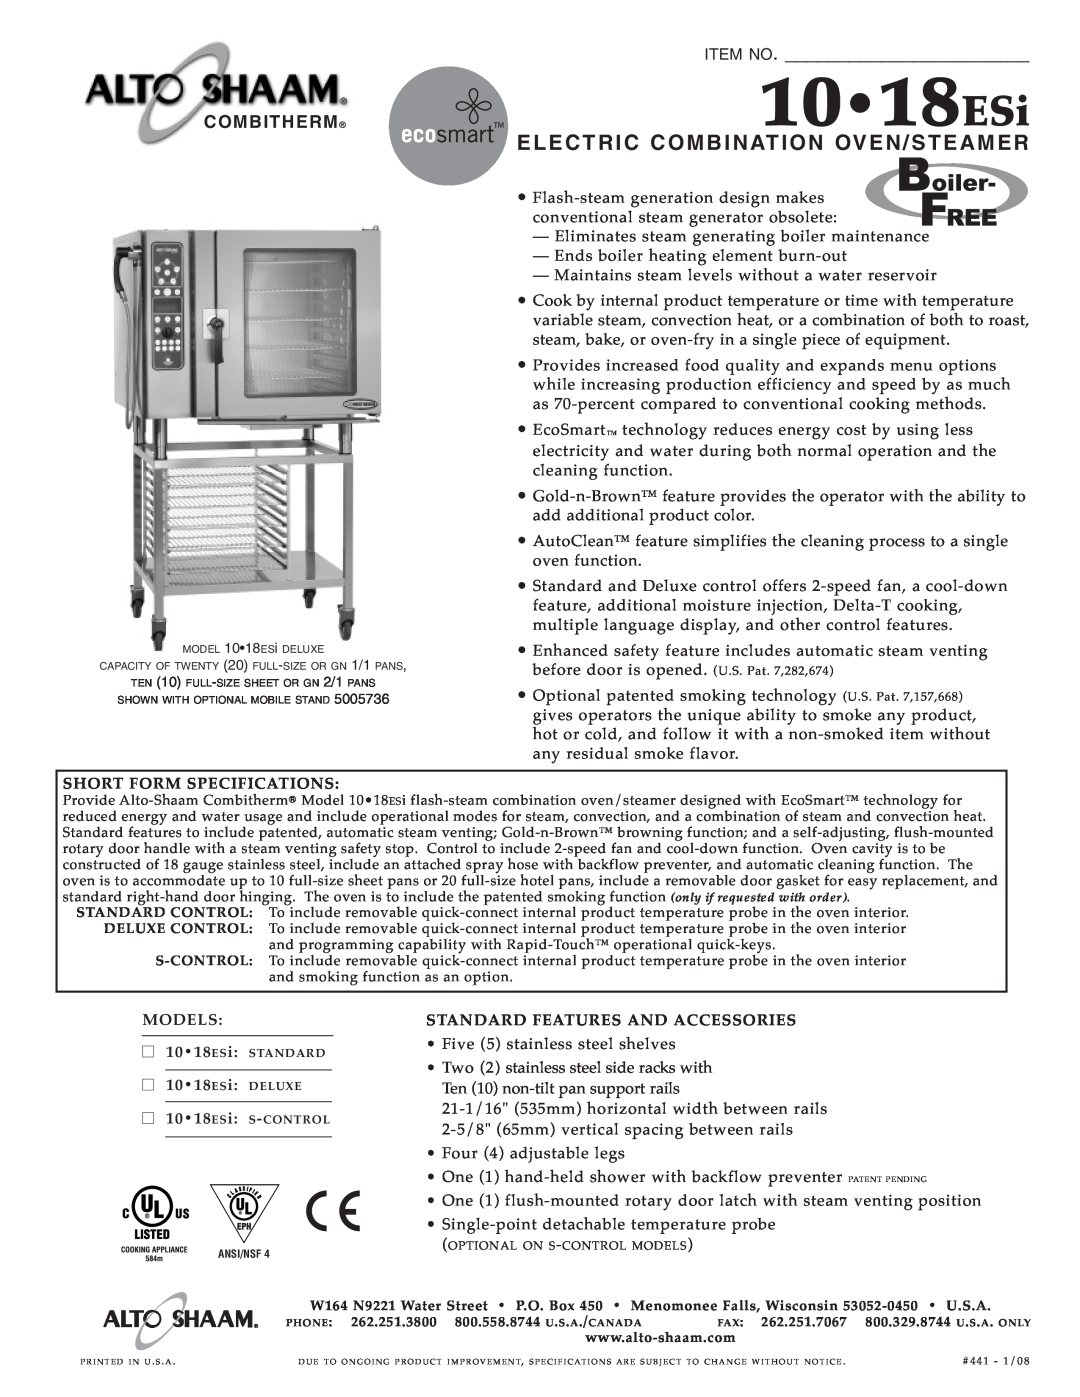 Alto-Shaam 10.18ESi specifications 1018ESi, Elect Ric Combina Tion Oven/S Teame R, Item No, Combitherm 